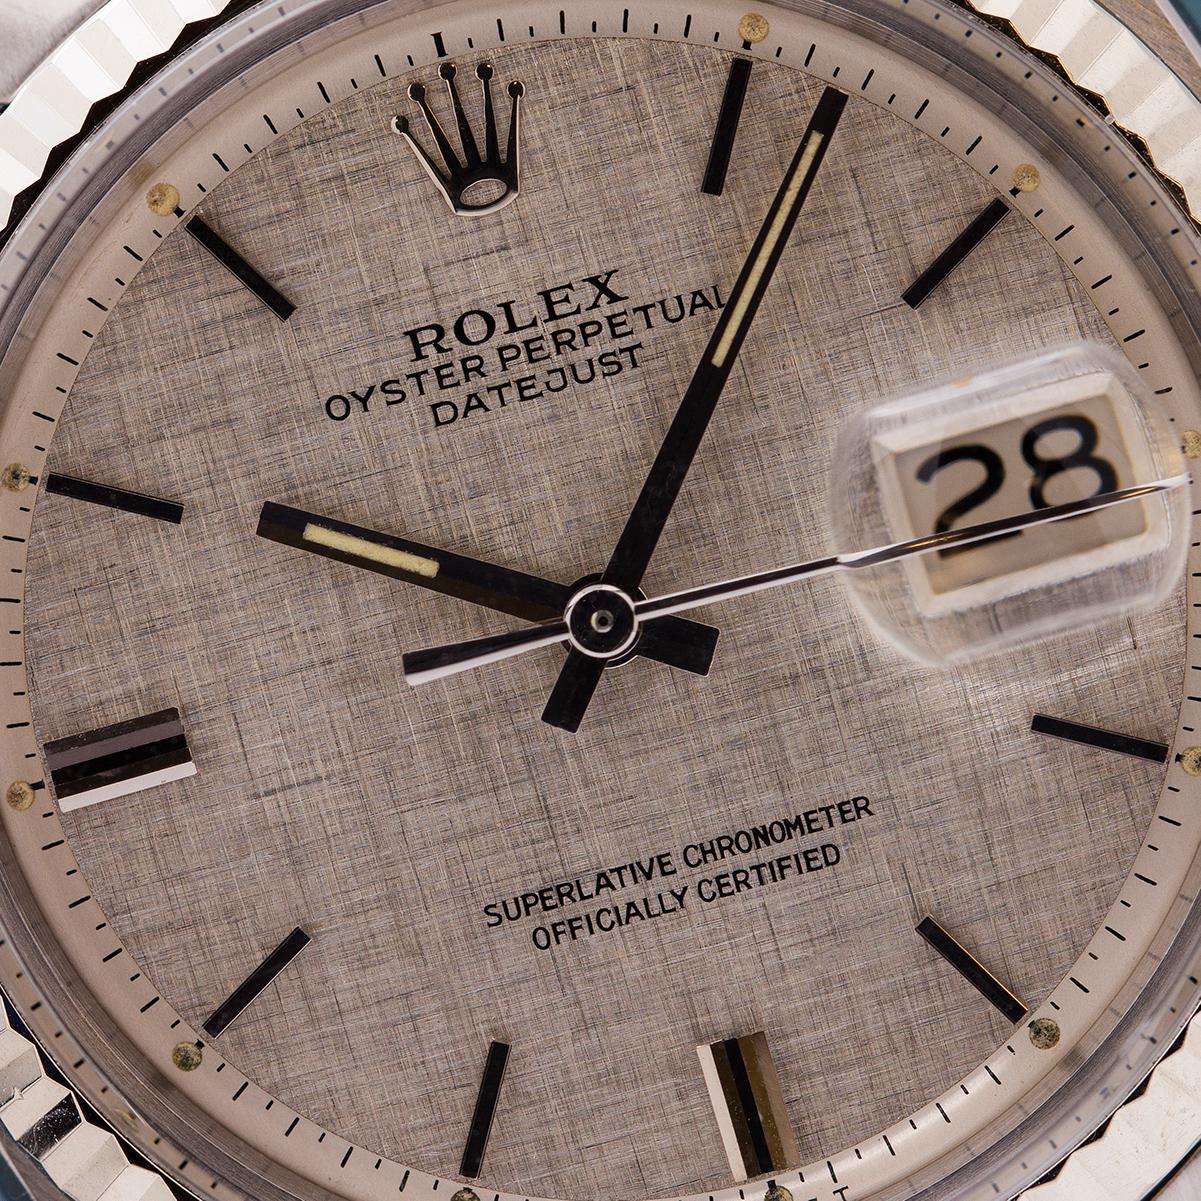 Rolex Datejust stainless steel ref 1601, serial# 3.2 million circa 1971. Featuring 36mm diameter Oyster case with acrylic crystal, and very distinctive silvered satin, linen finish dial with applied silver indexes inlaid with black enamel, and